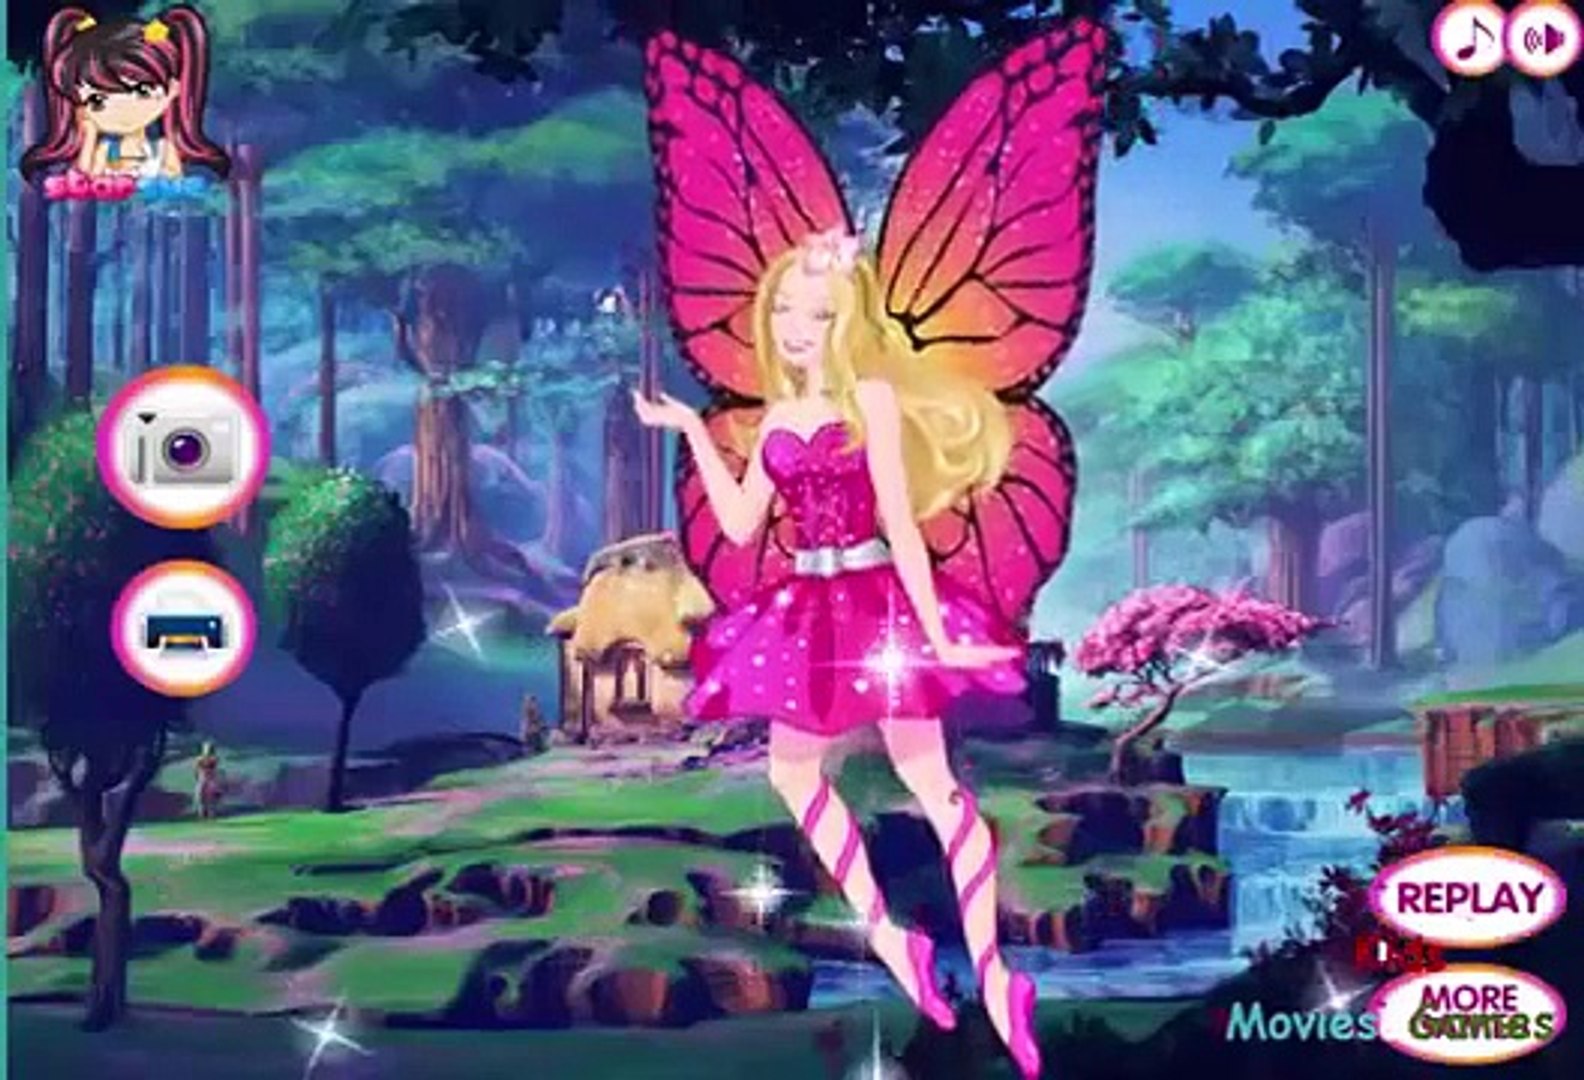 Barbie Mariposa Game : Free Download, Borrow, and Streaming